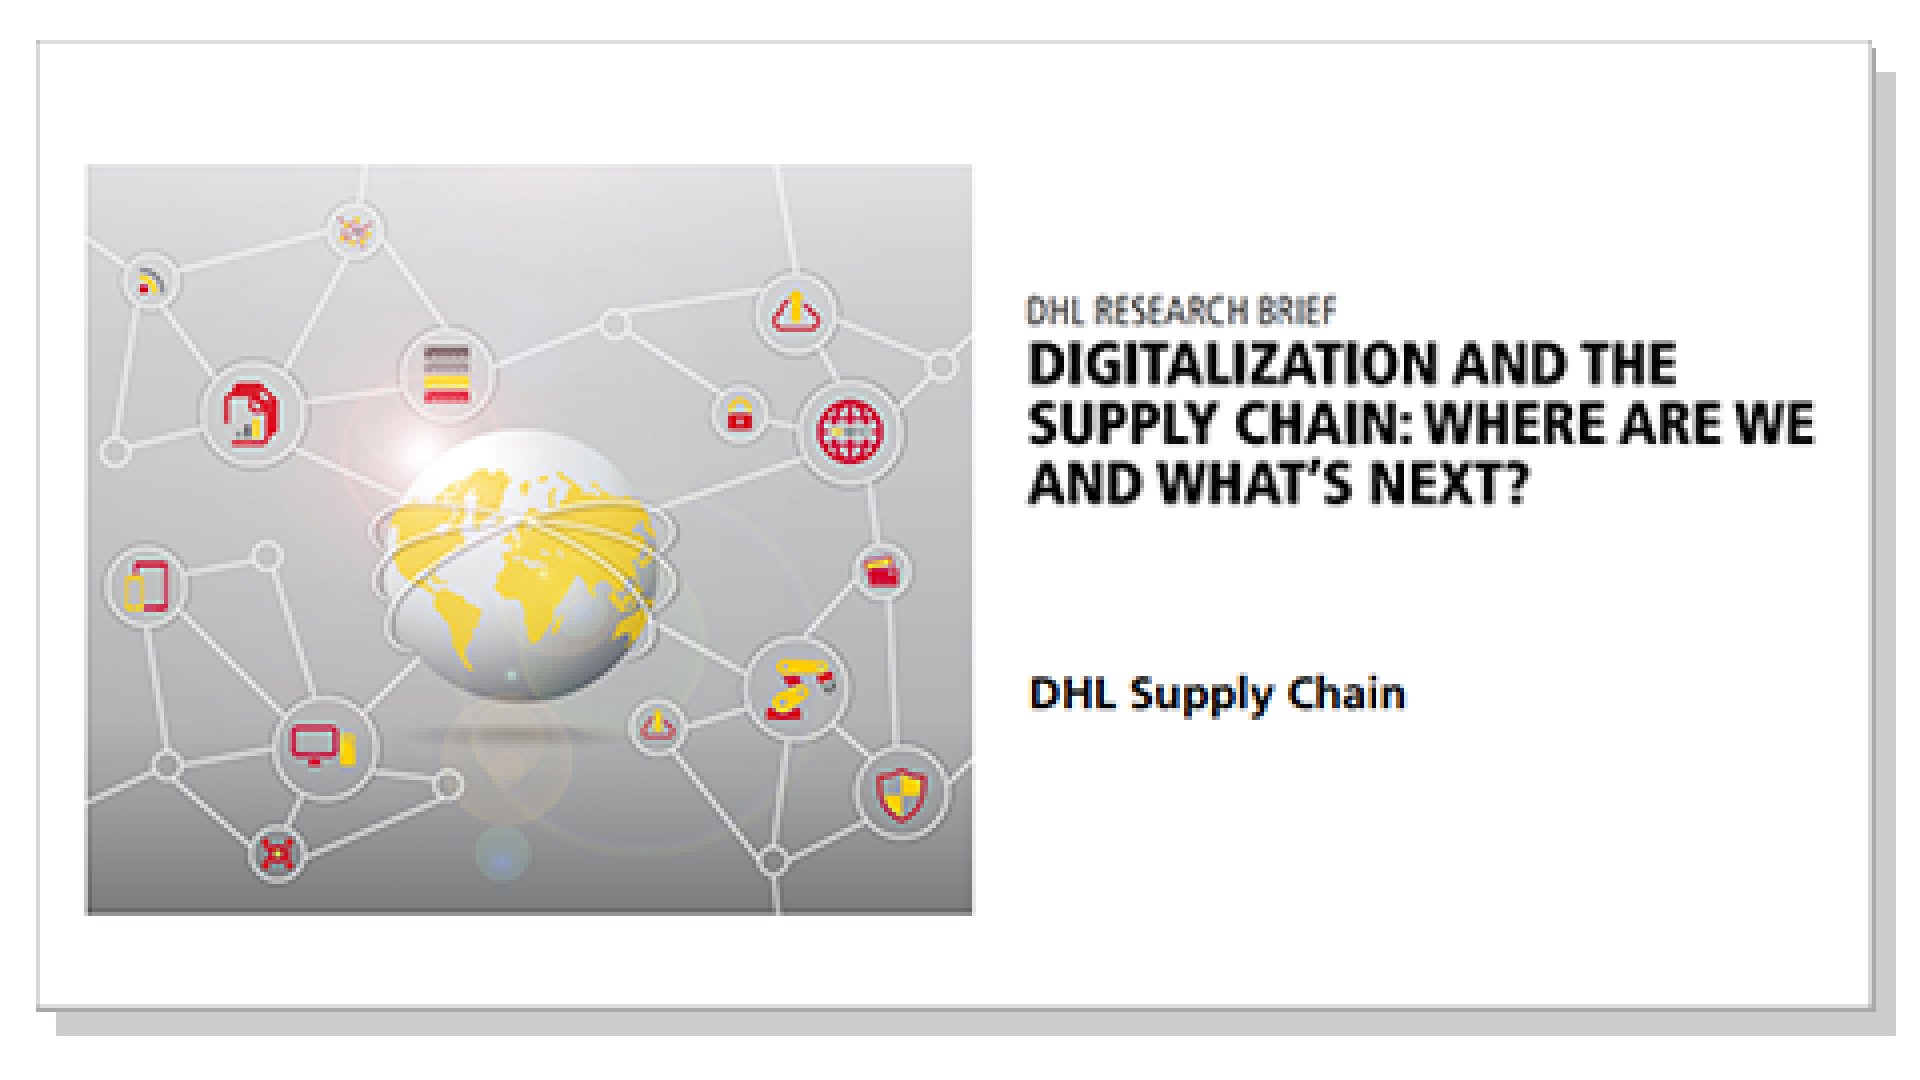 FIND OUT WHERE COMPANIES ARE ON THEIR SUPPLY CHAIN DIGITALIZATION JOURNEY